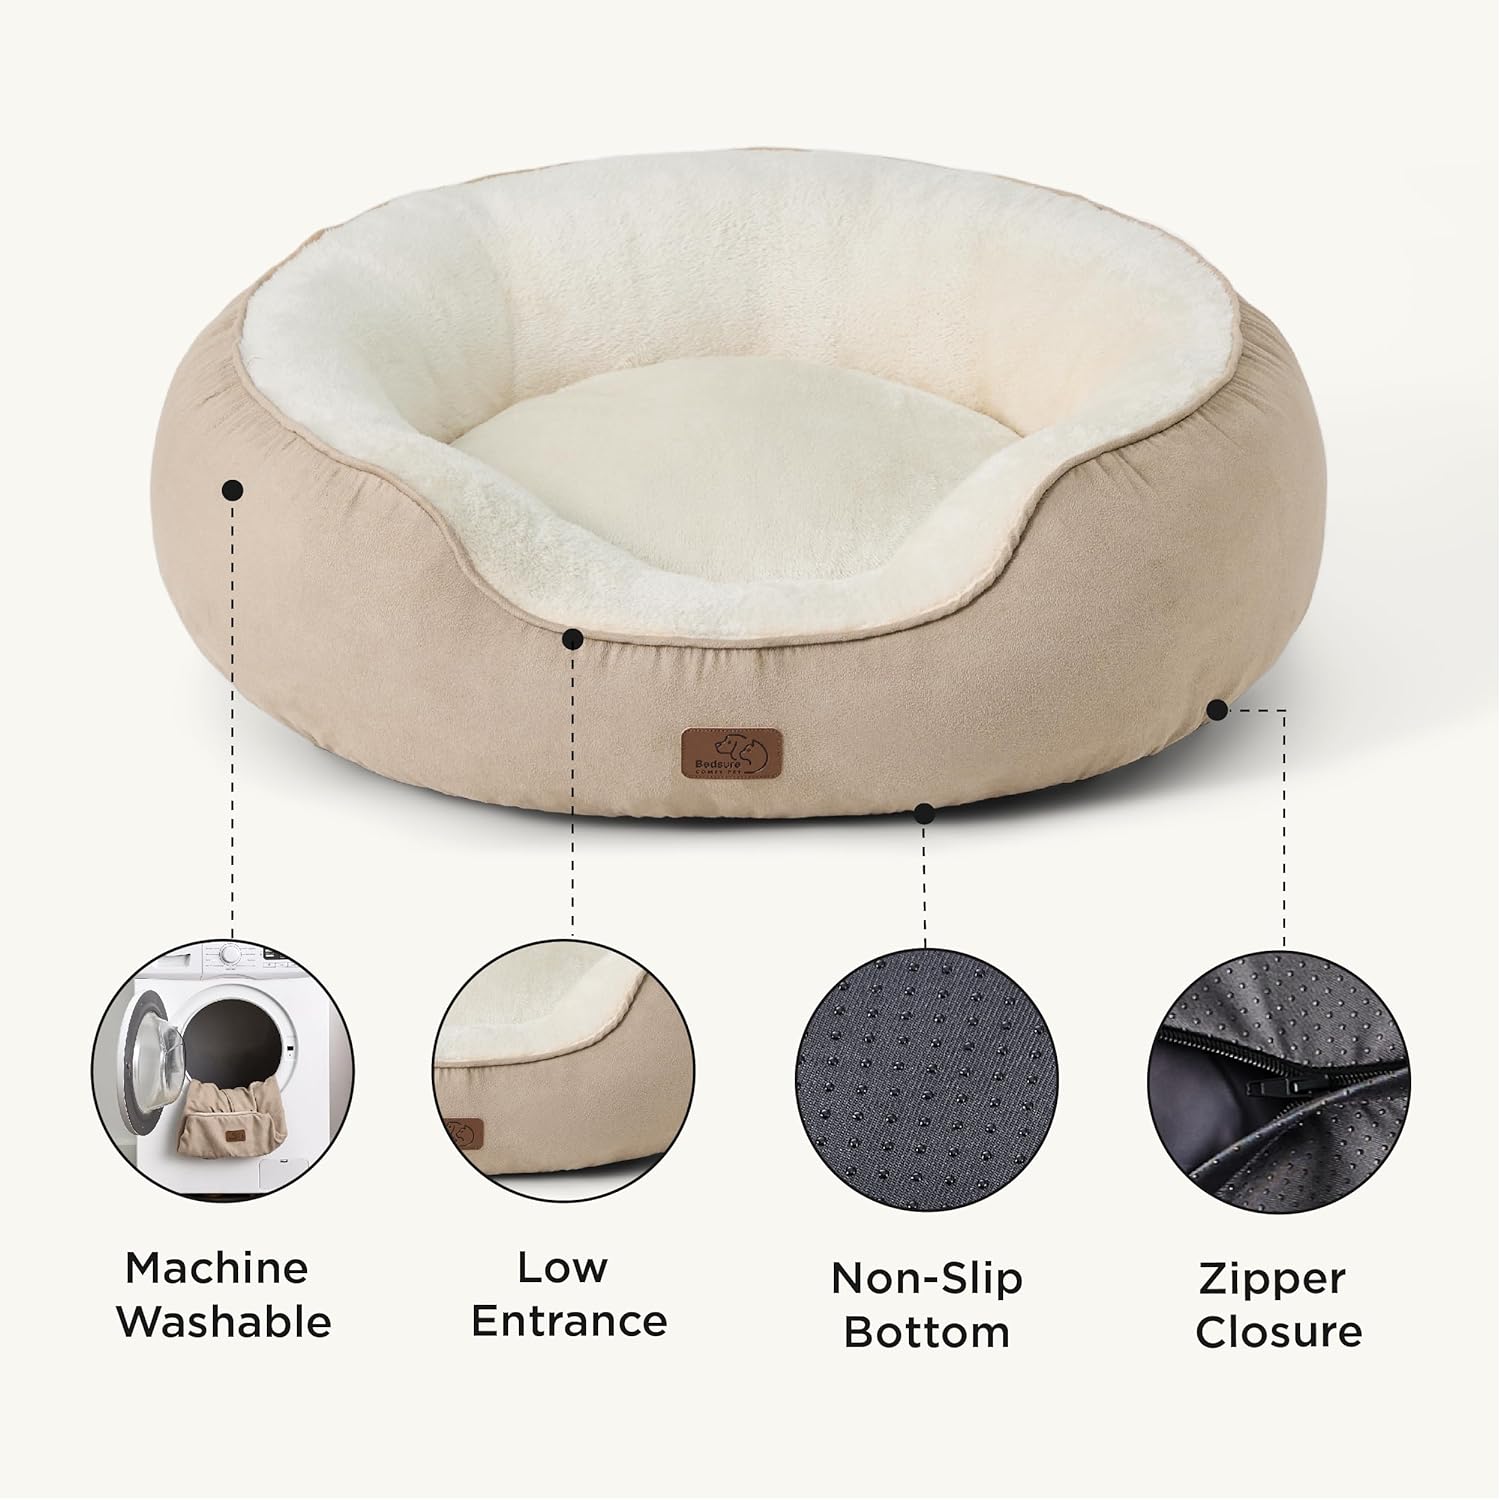 Bedsure Dog Bed Review